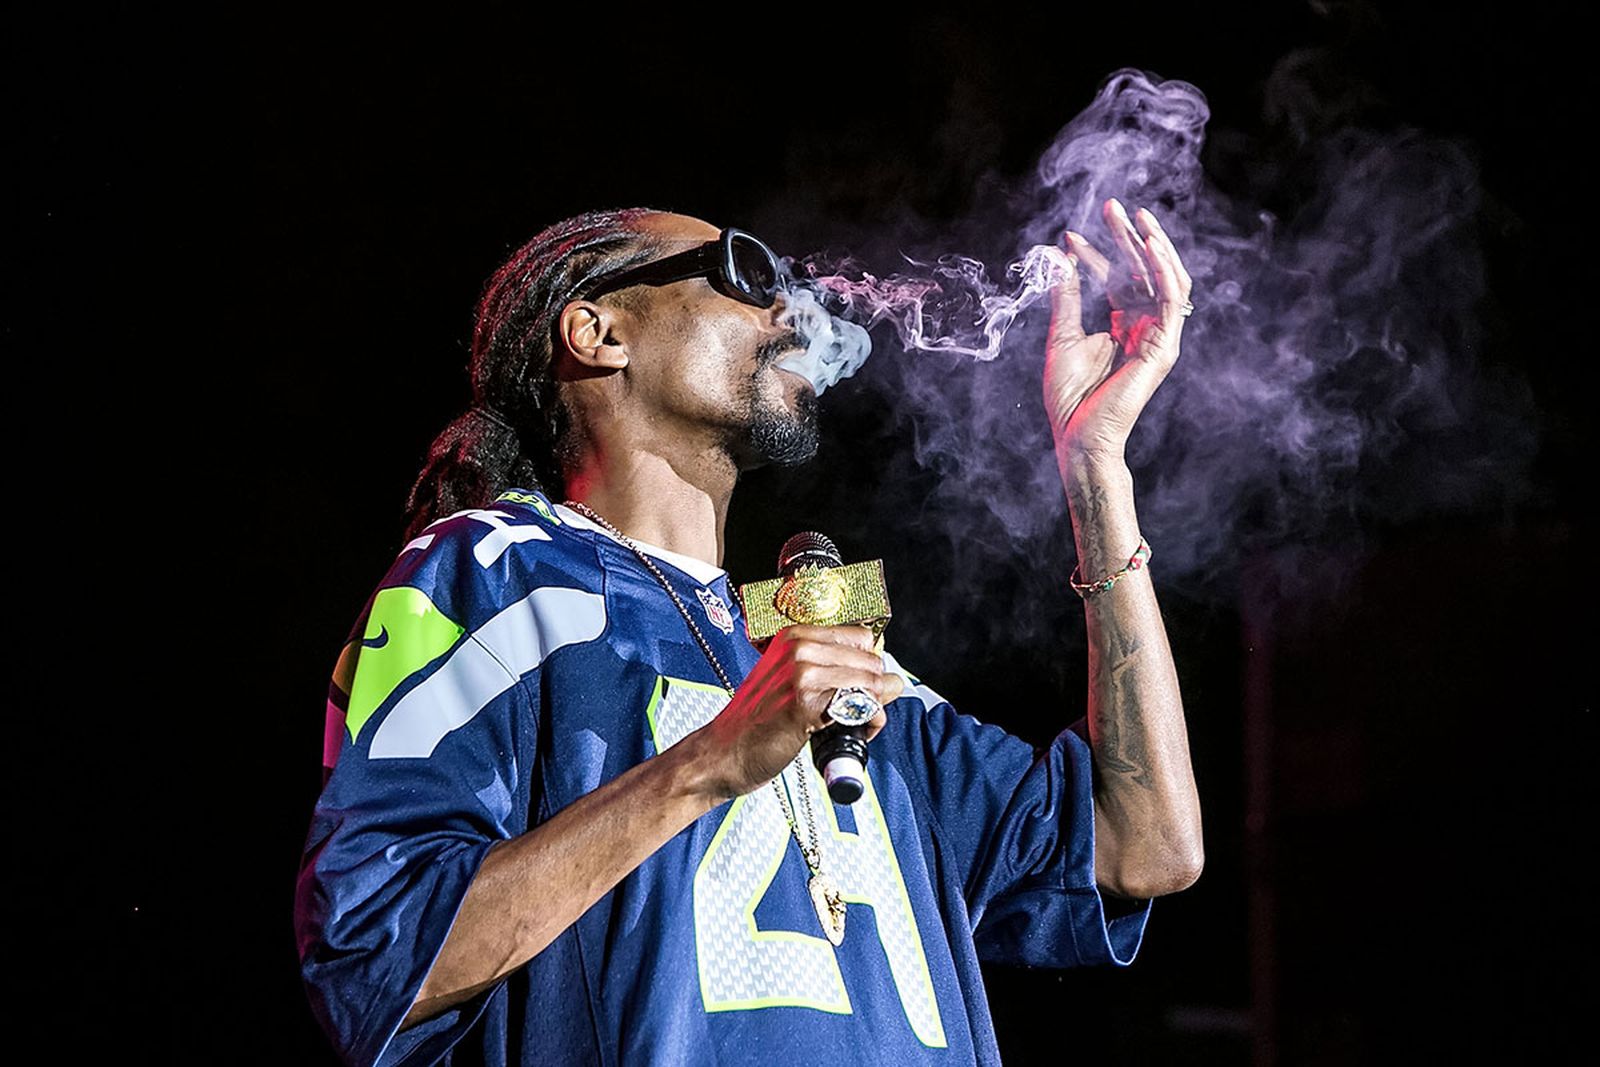 Snoop Dogg smokes a blunt on stage